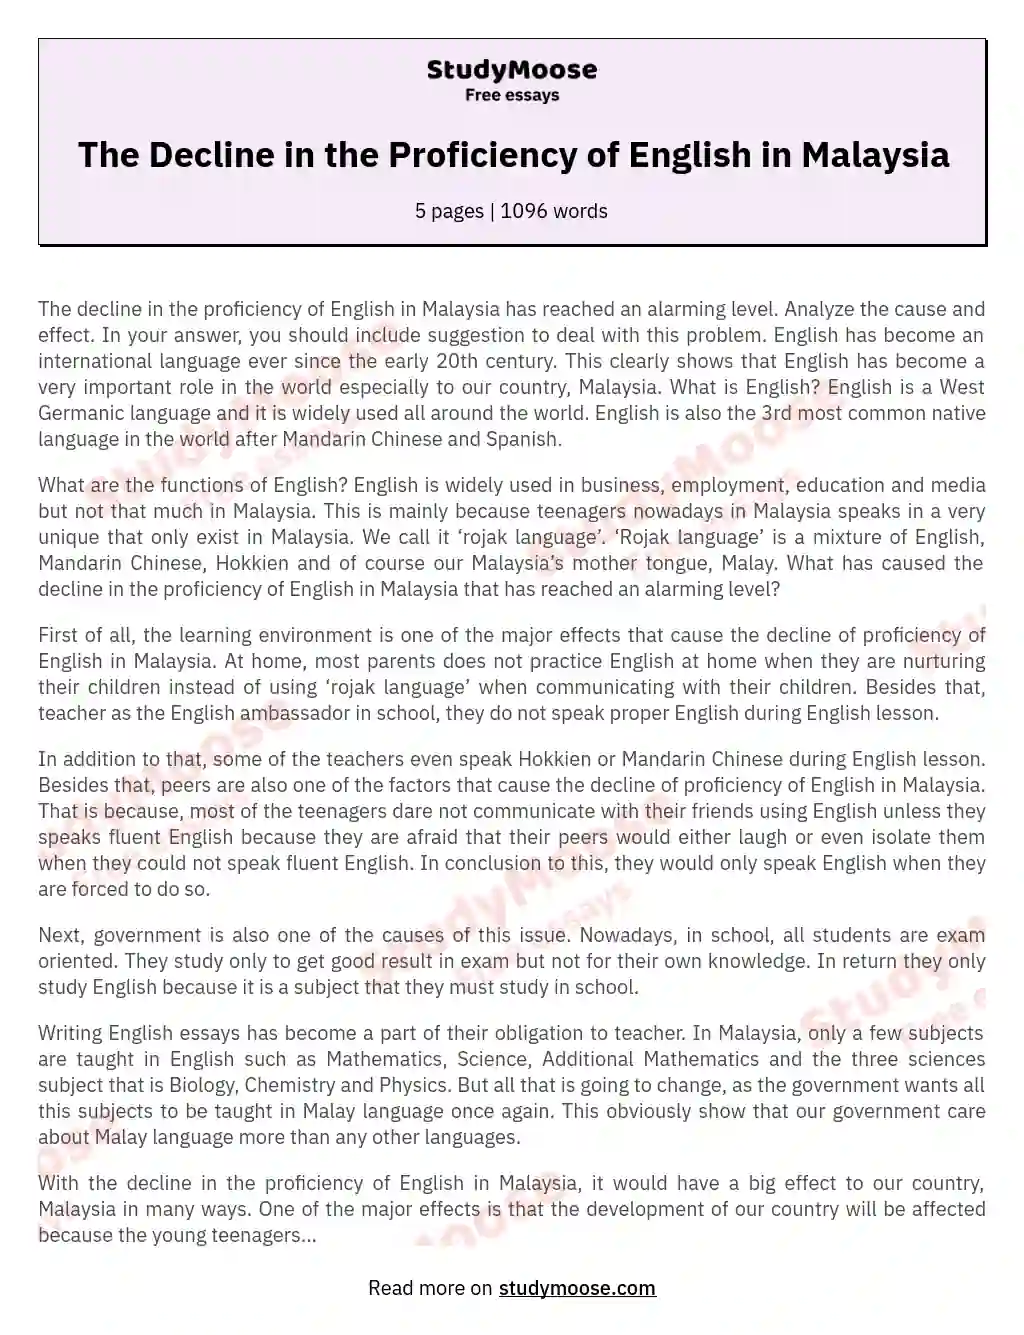 The Decline in the Proficiency of English in Malaysia essay